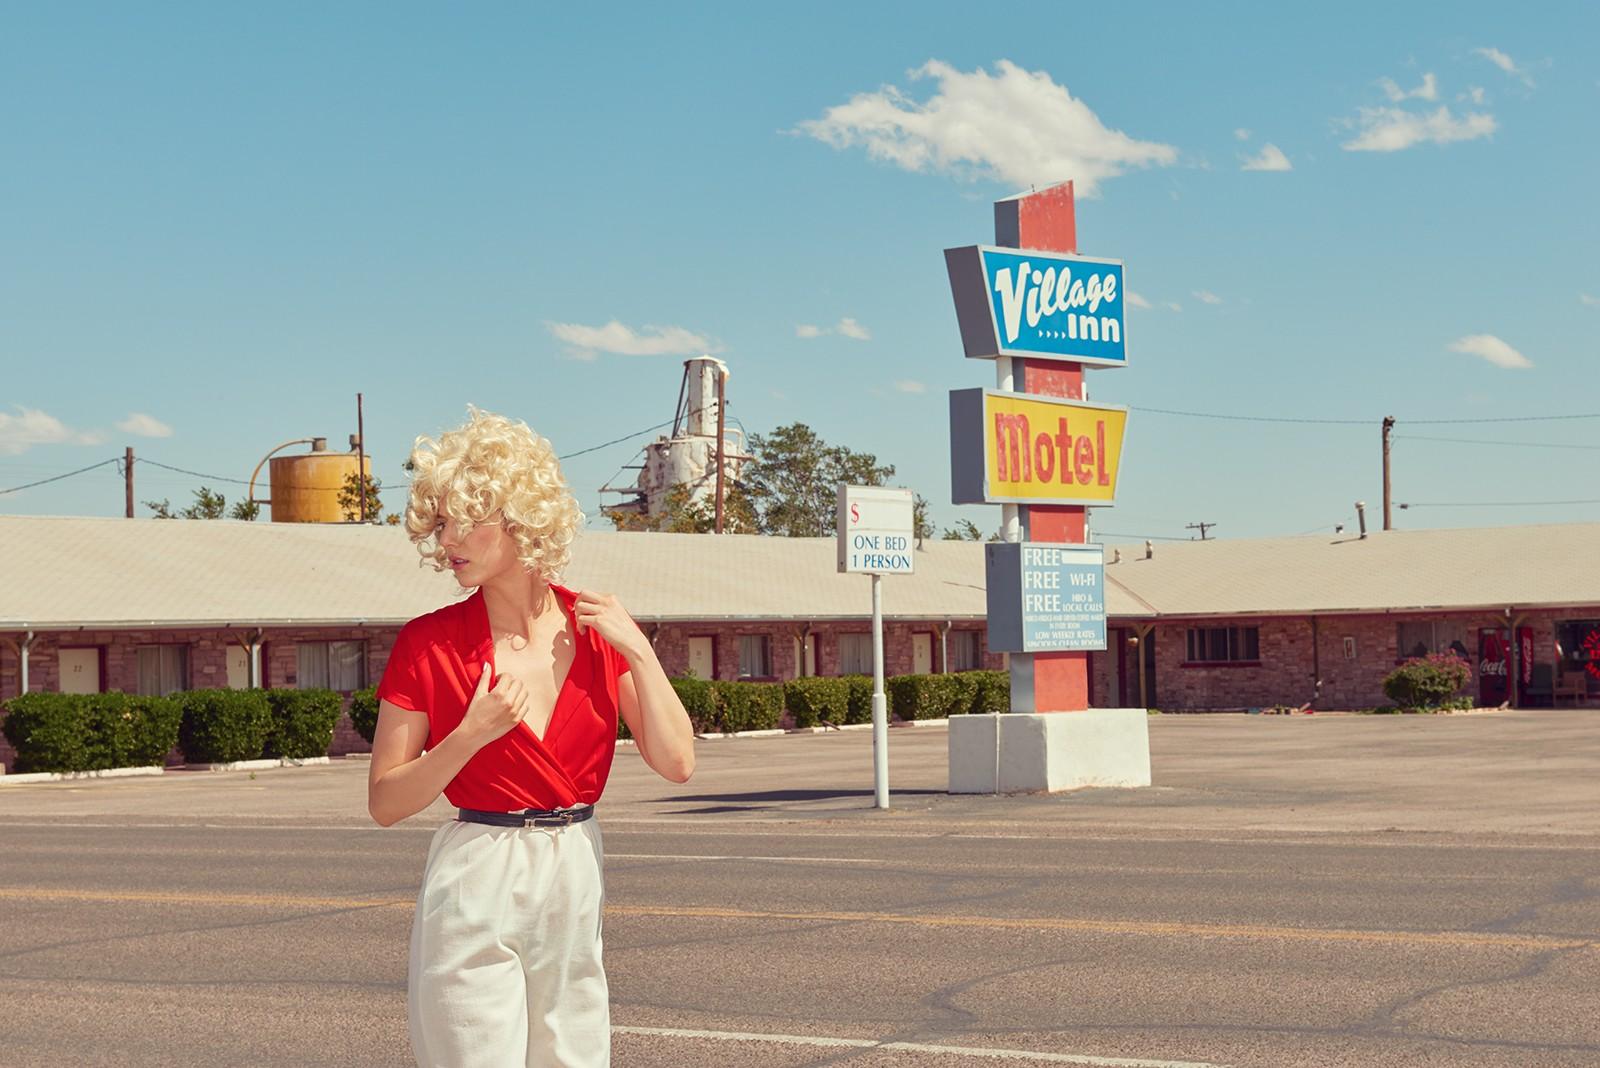 Untitled #18, from the series 'Sorry, No Vacancy'', 2016 - Kourtney Roy
Signed and inscribed with title on label on reverse of mount
Digital pigment print

Available in four sizes:
16 x 24 inches
24 x 36 inches 
32 x 47 inches
39 x 59